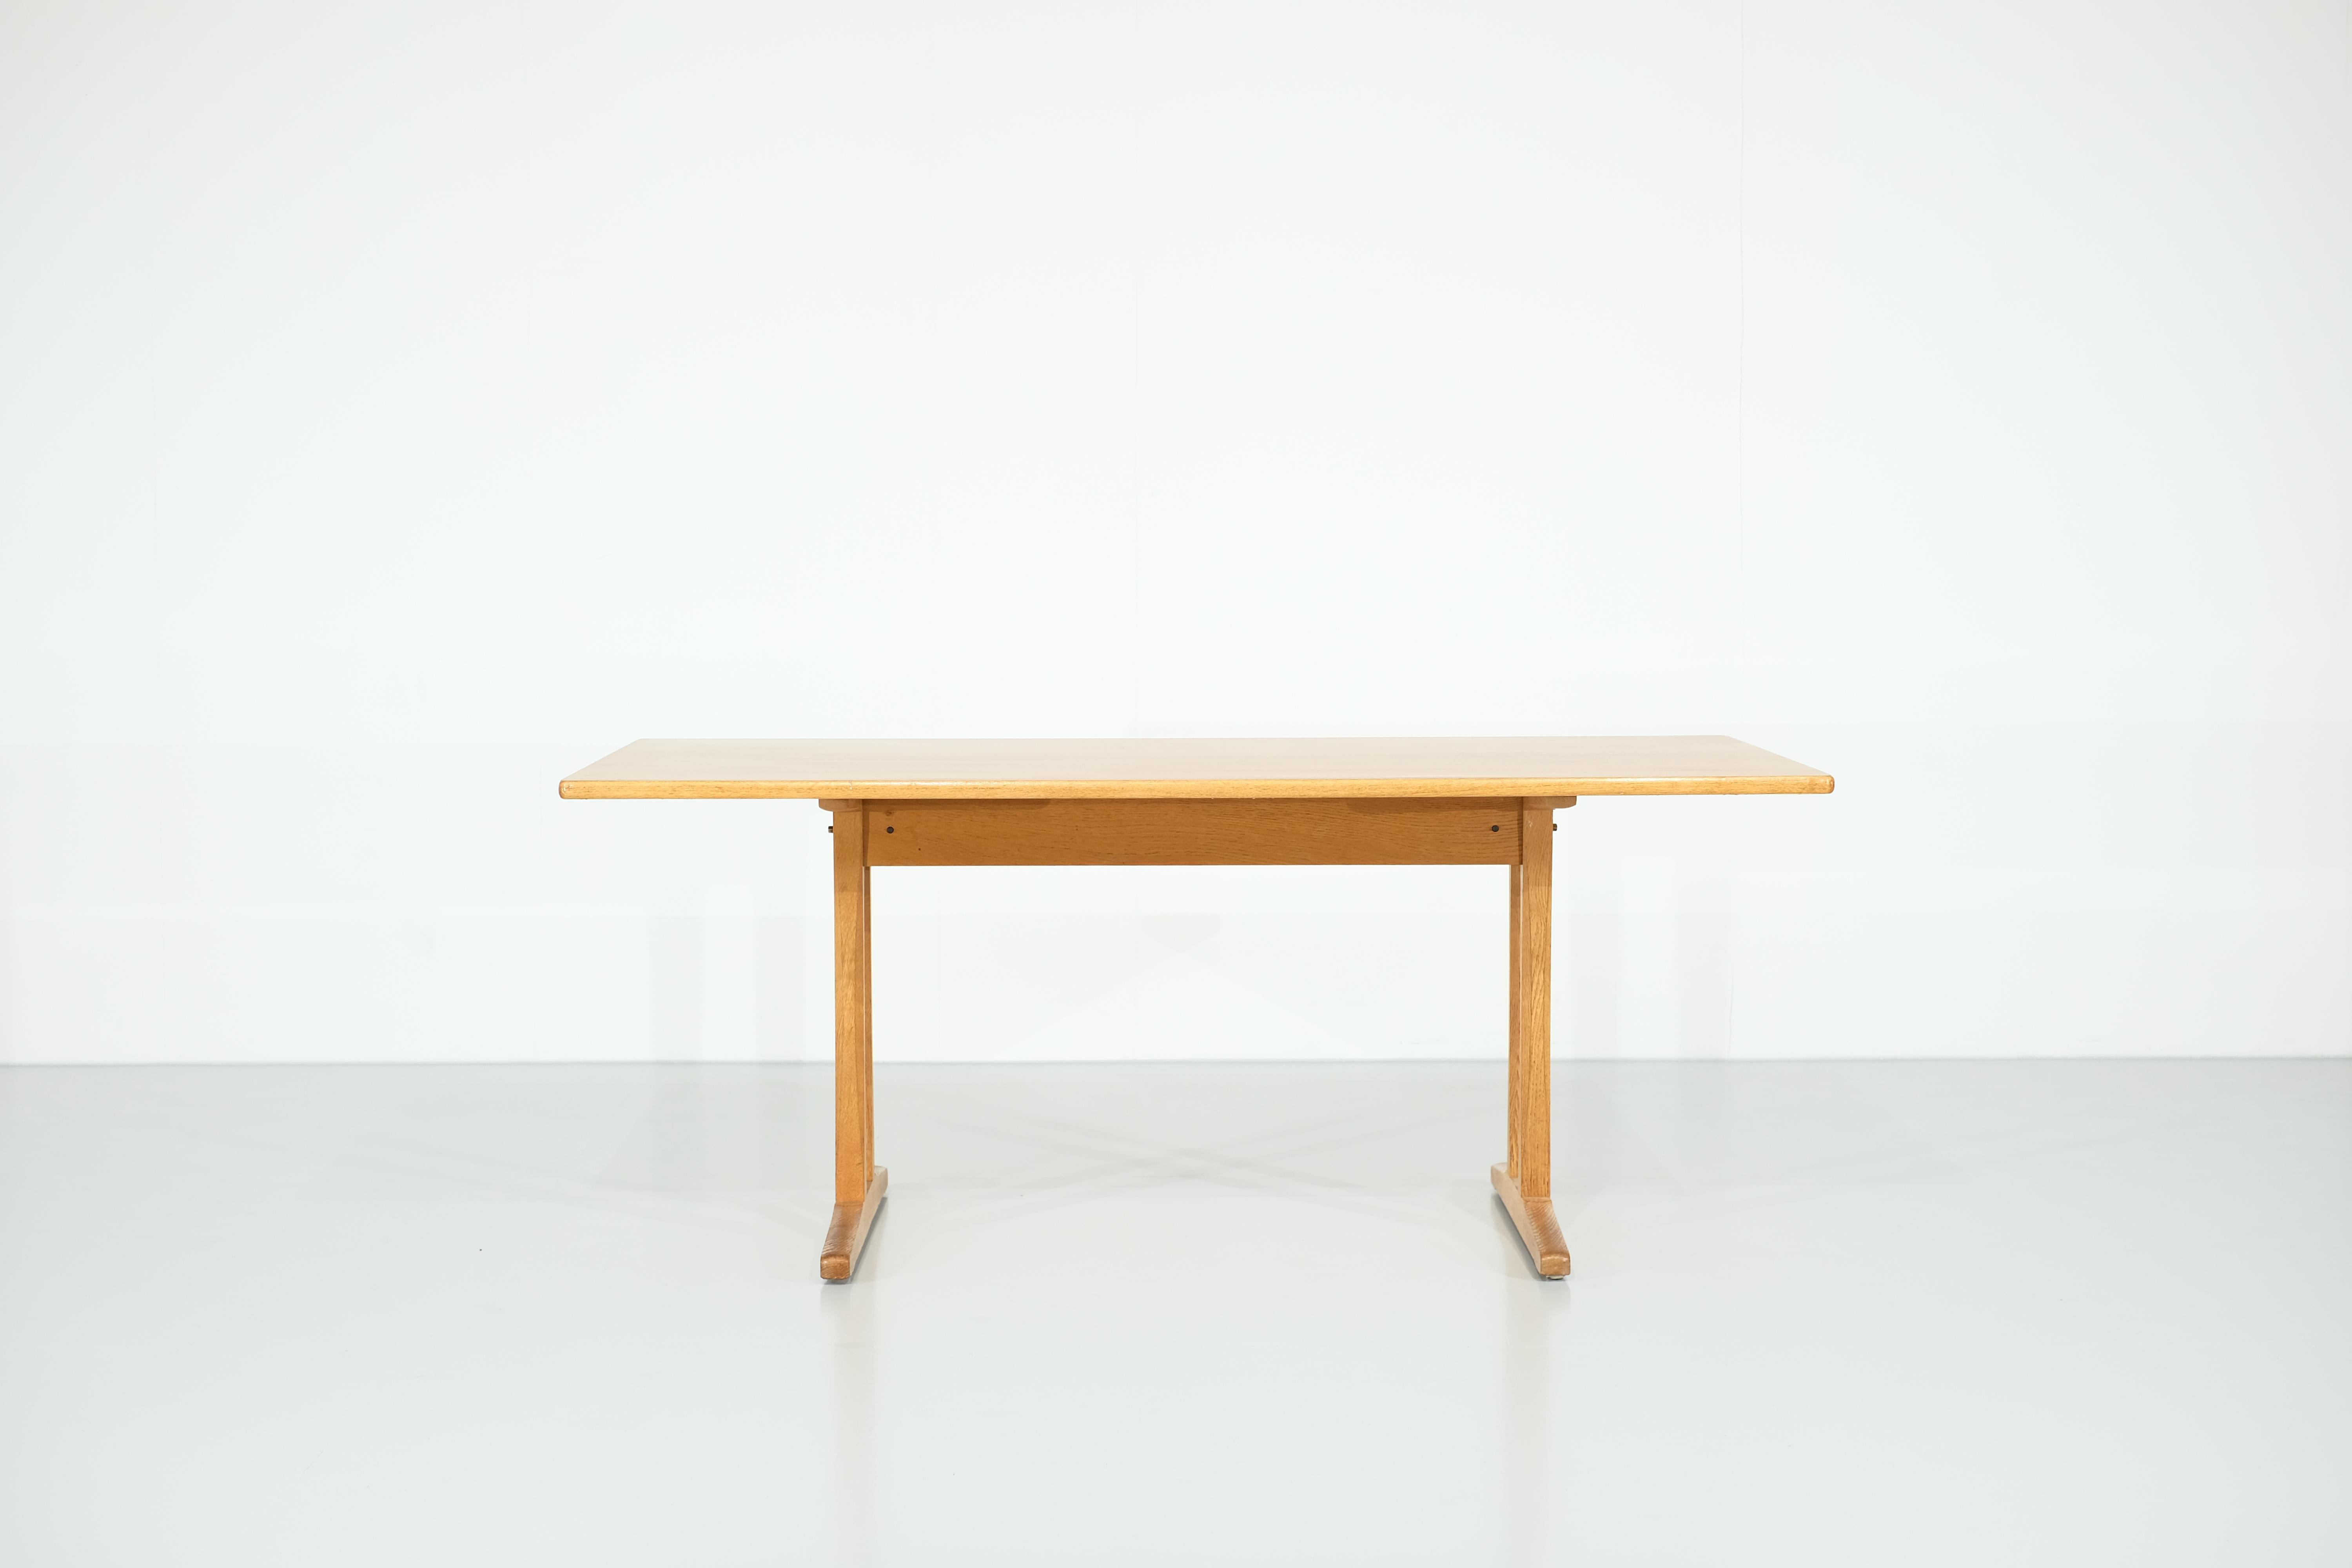 Scandinavian oak dining table model Shaker C18 by Borge Mogensen for FDB Møbler.

Its particularity is its 